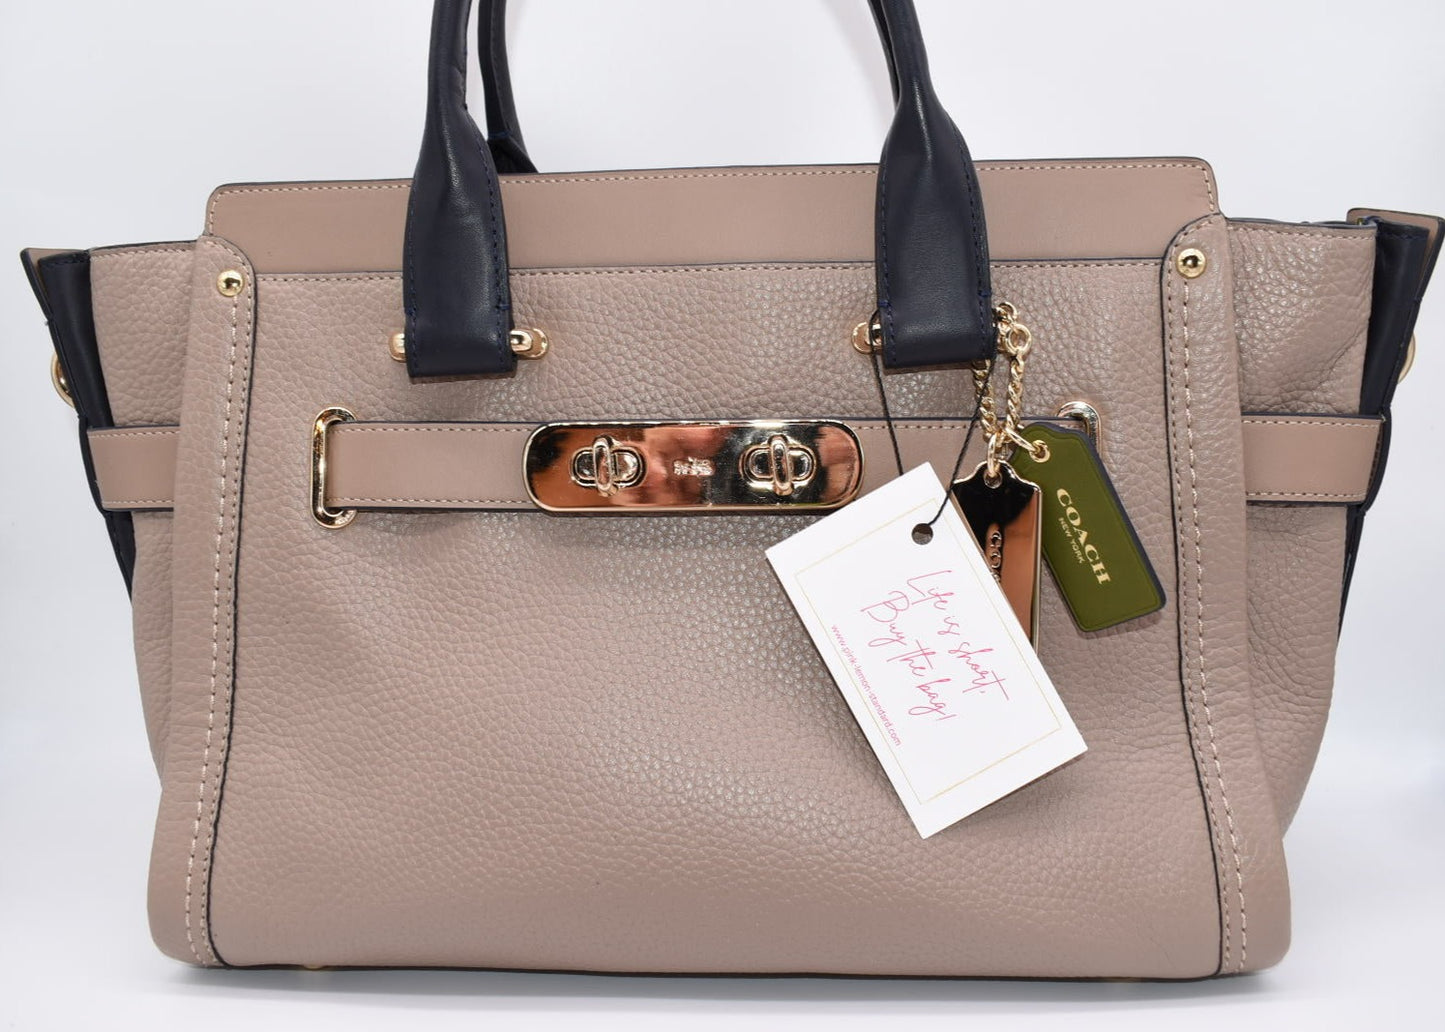 Coach Swagger Pebbled Leather Tote Bag in Colorblock